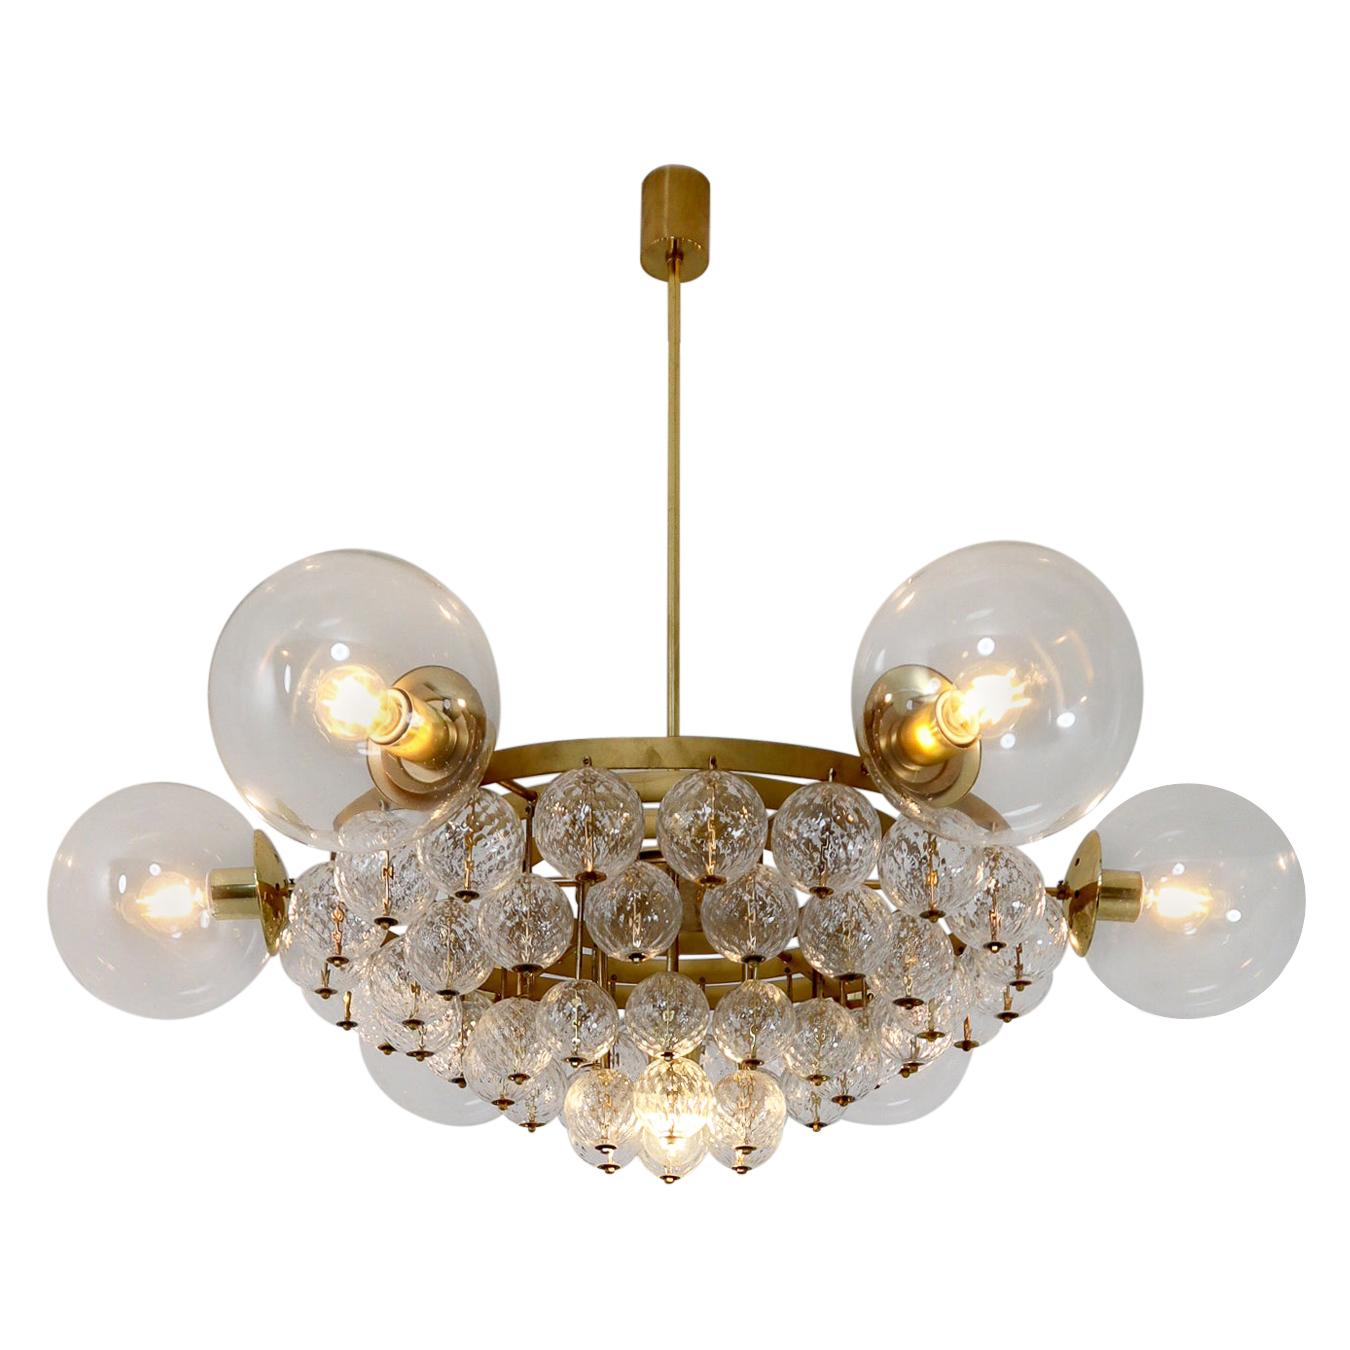 Large Hotel Chandeliers with Brass Fixture and Structured Glass Globes